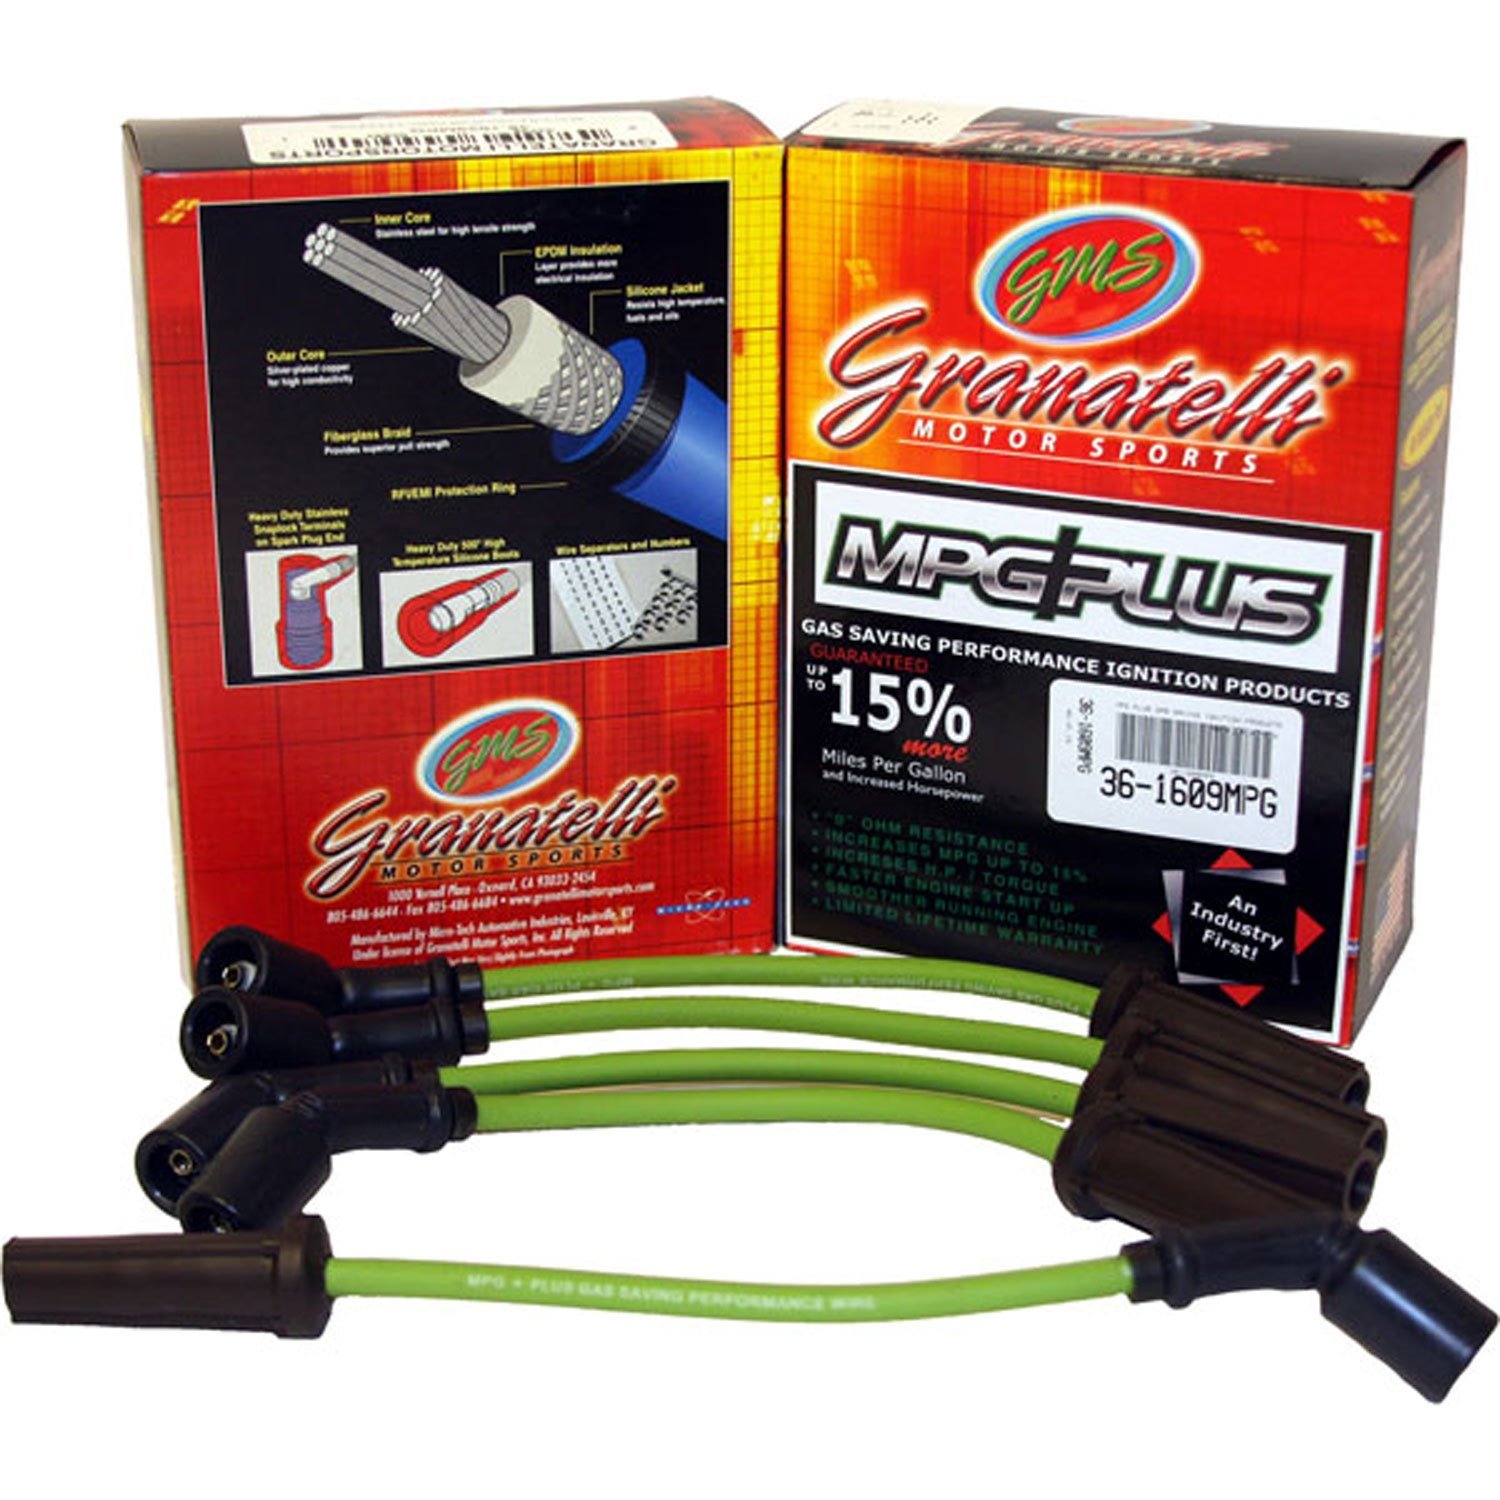 MPG Wires MAZDA RX SERIES 2CYL 1.3L 86-92